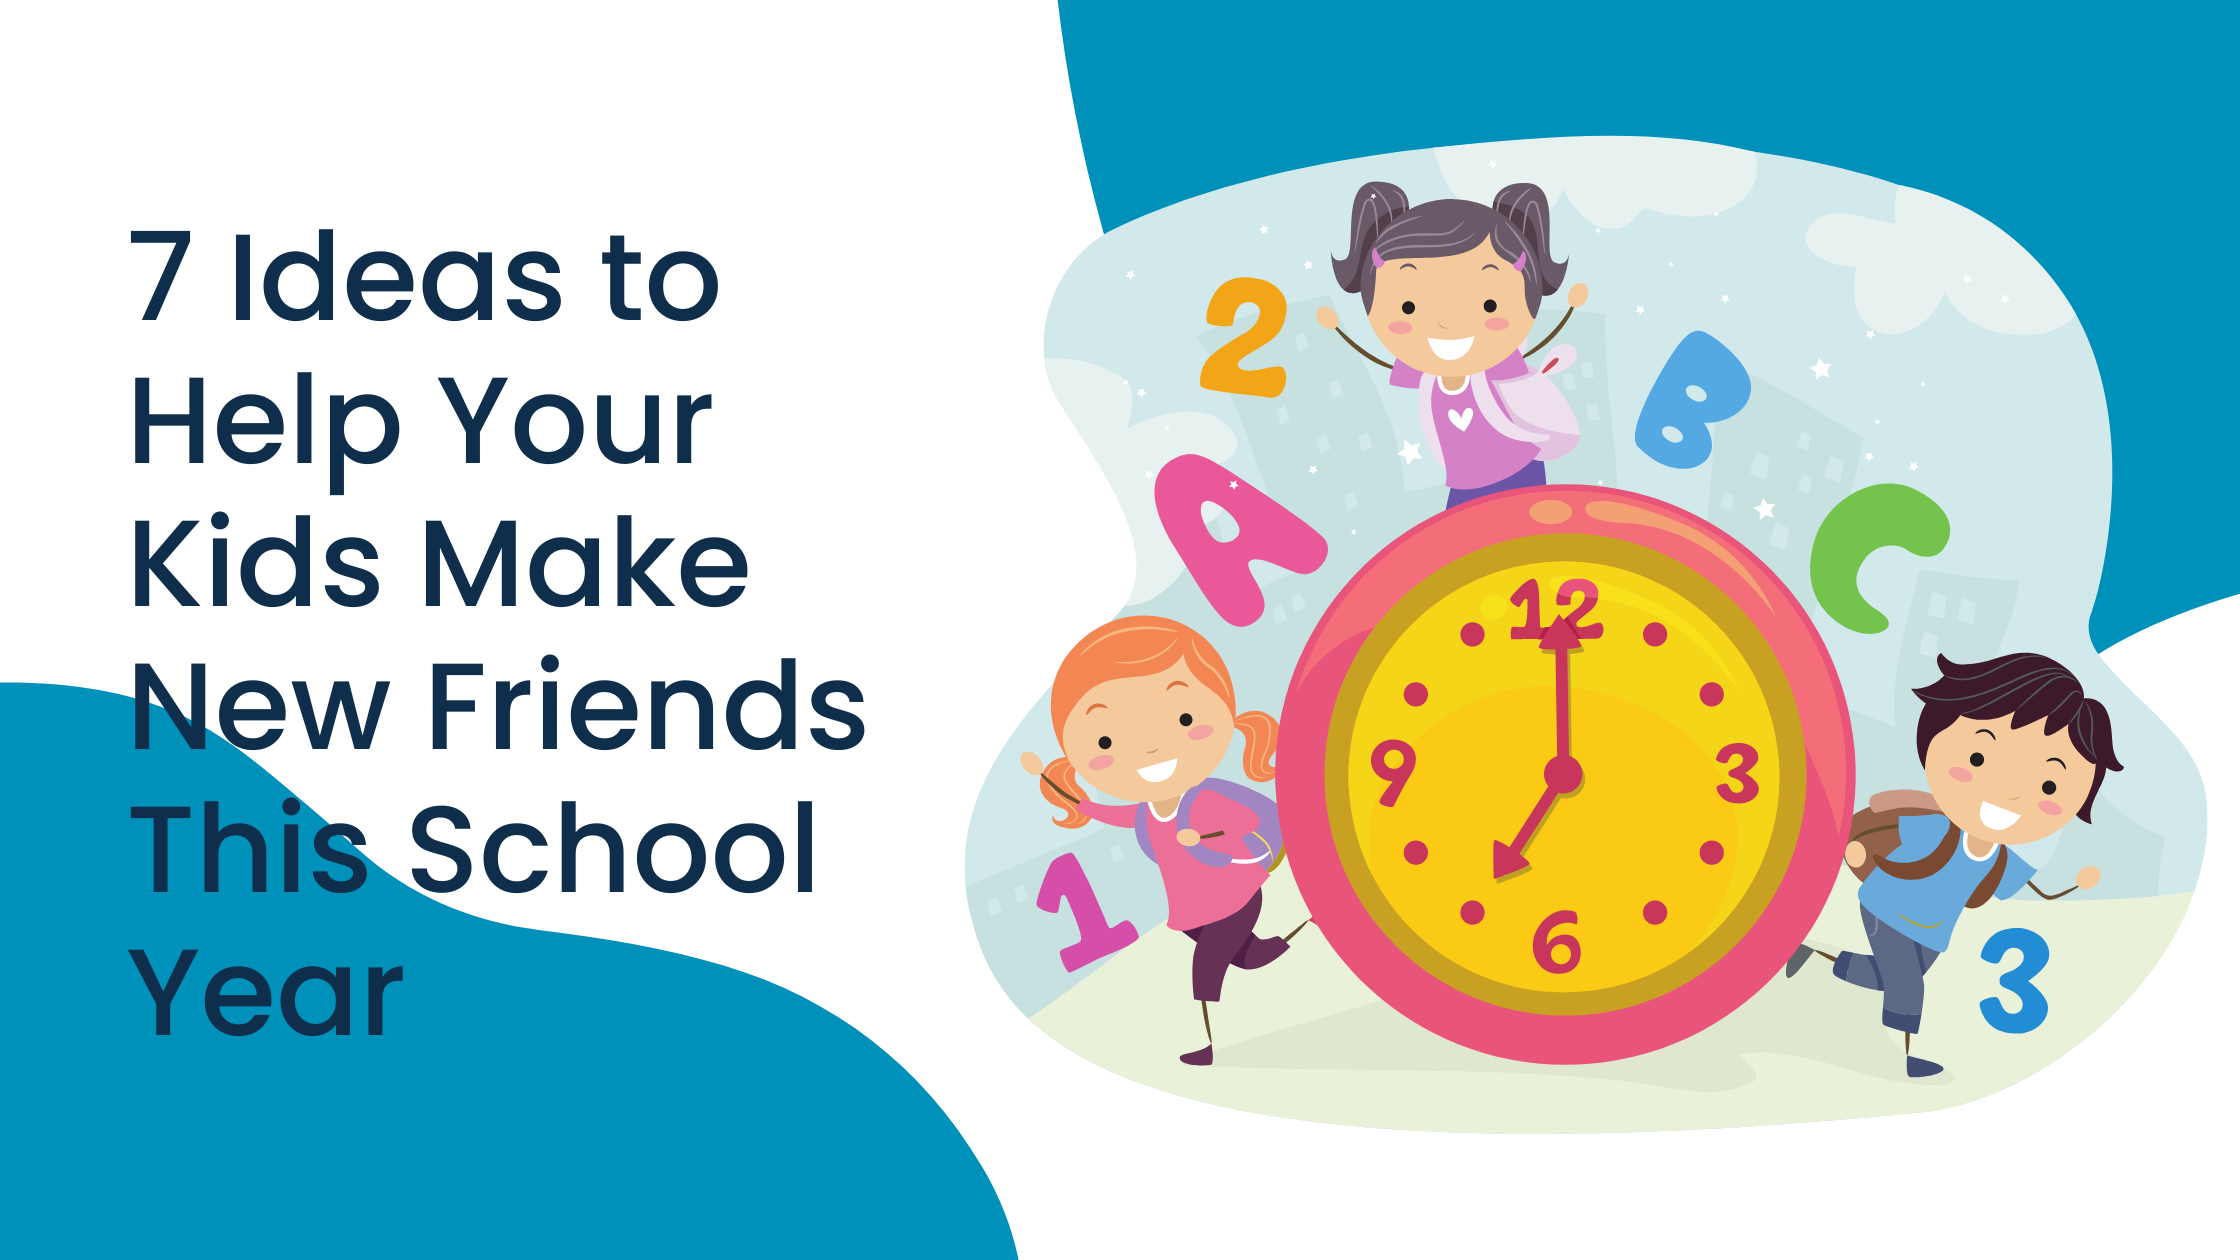 7 Ideas to Help Your Kids Make New Friends This School Year - Mantachie  Rural Health Care, Inc.